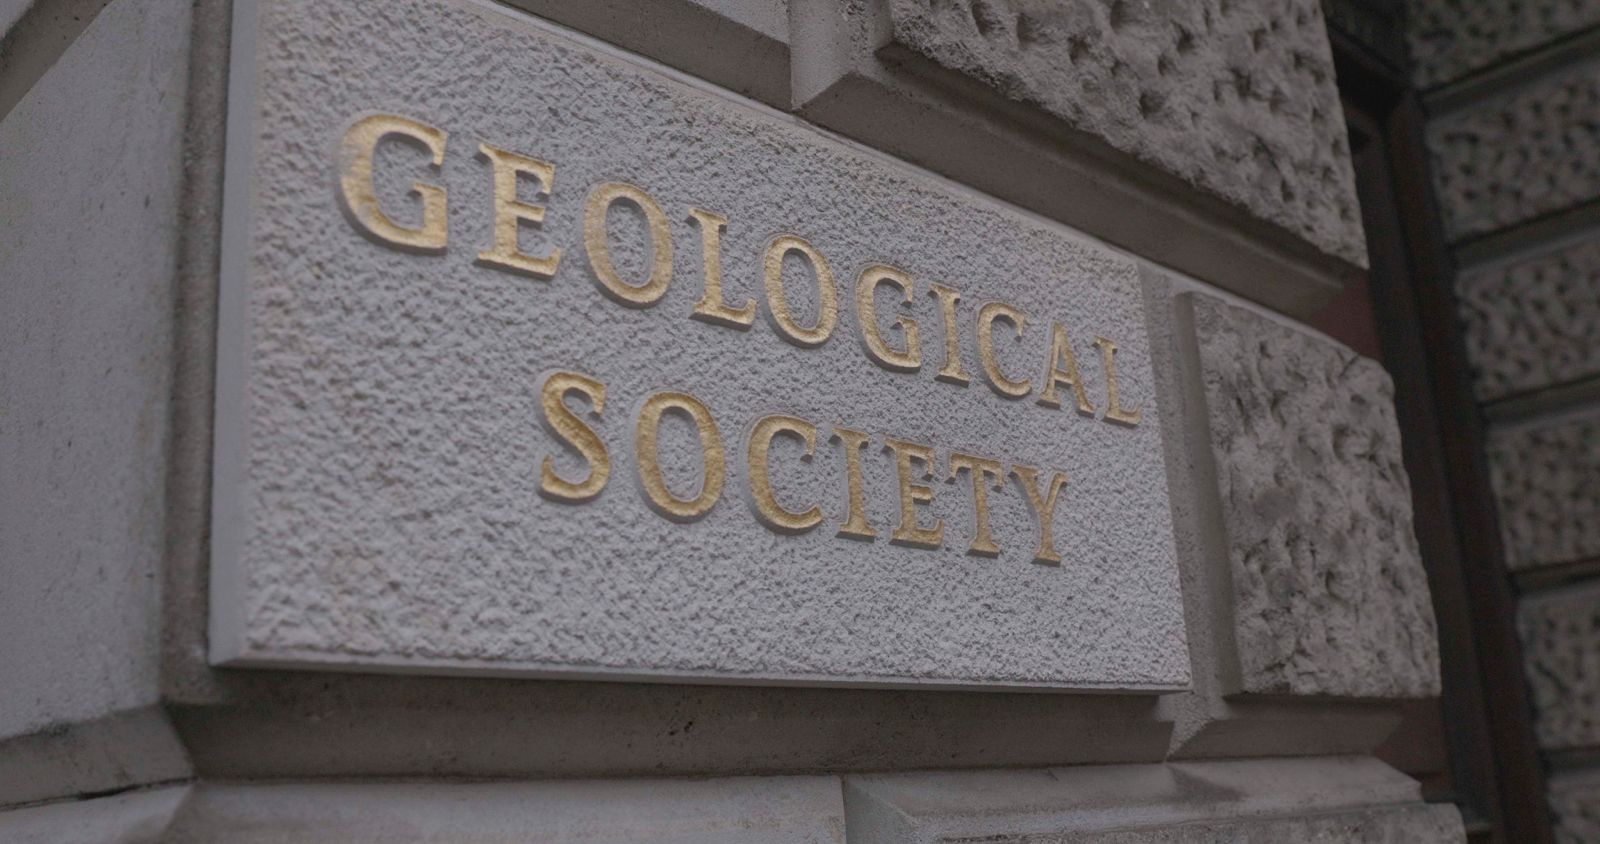 Image of the plaque outside the Geological Society